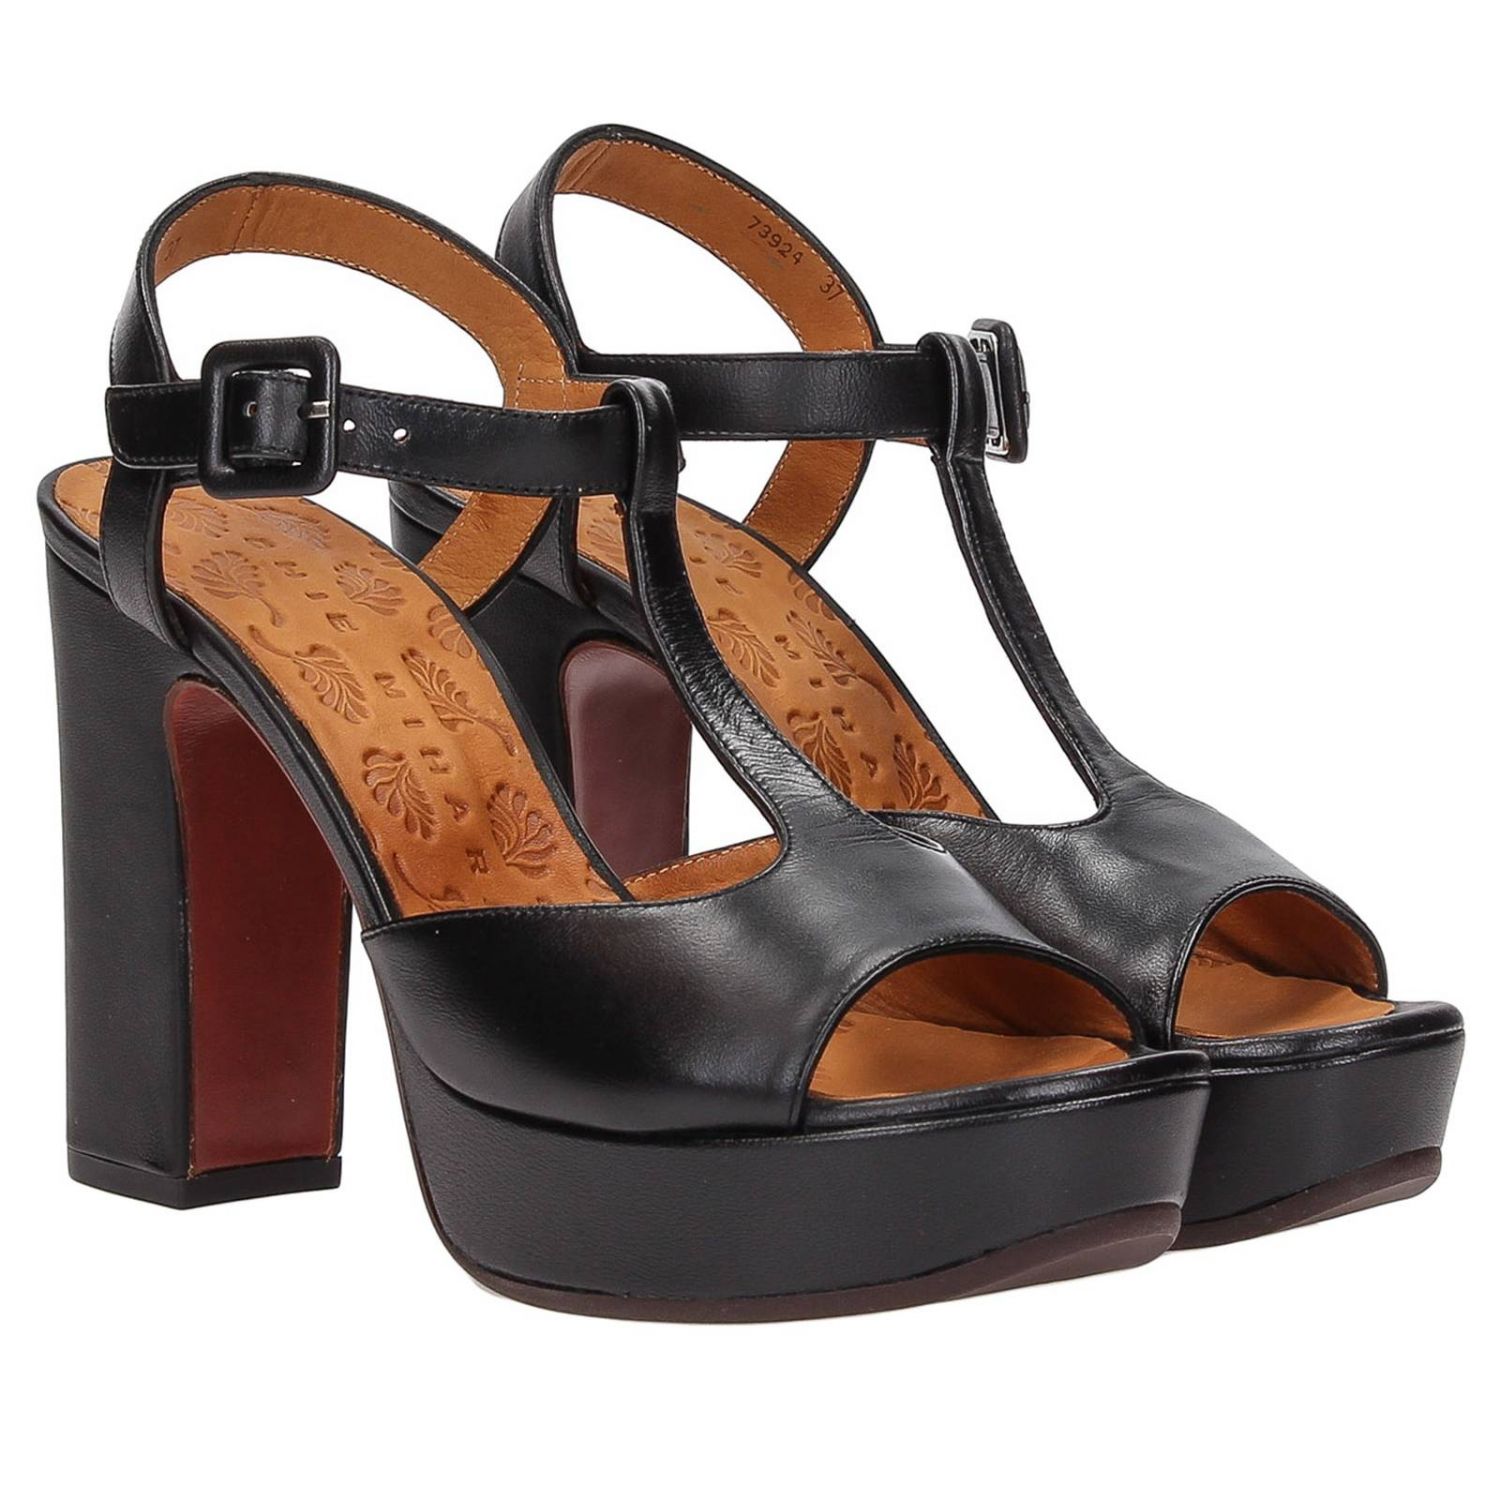 Chie Mihara Outlet: Shoes women | Heeled Sandals Chie Mihara Women ...